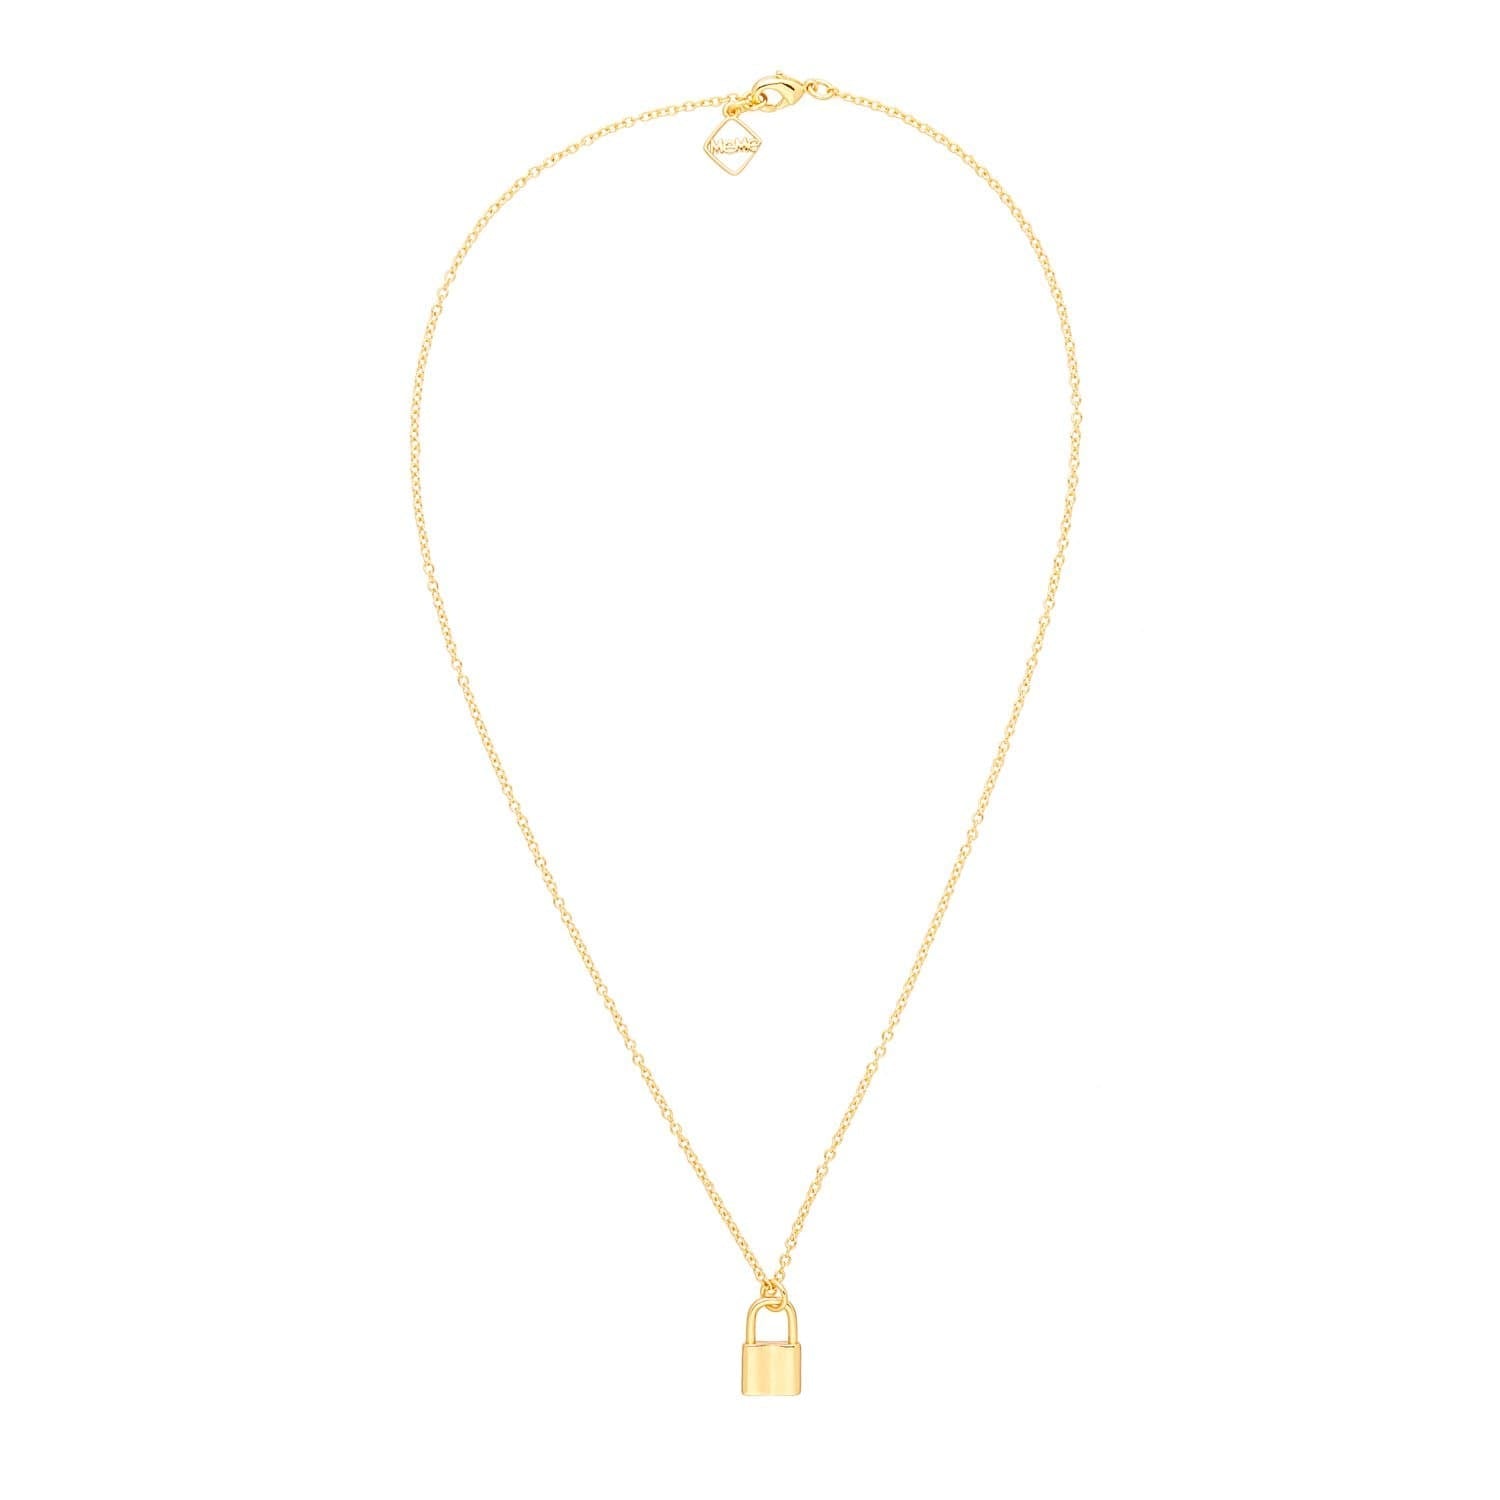 Love Lockdown Necklace - Gold